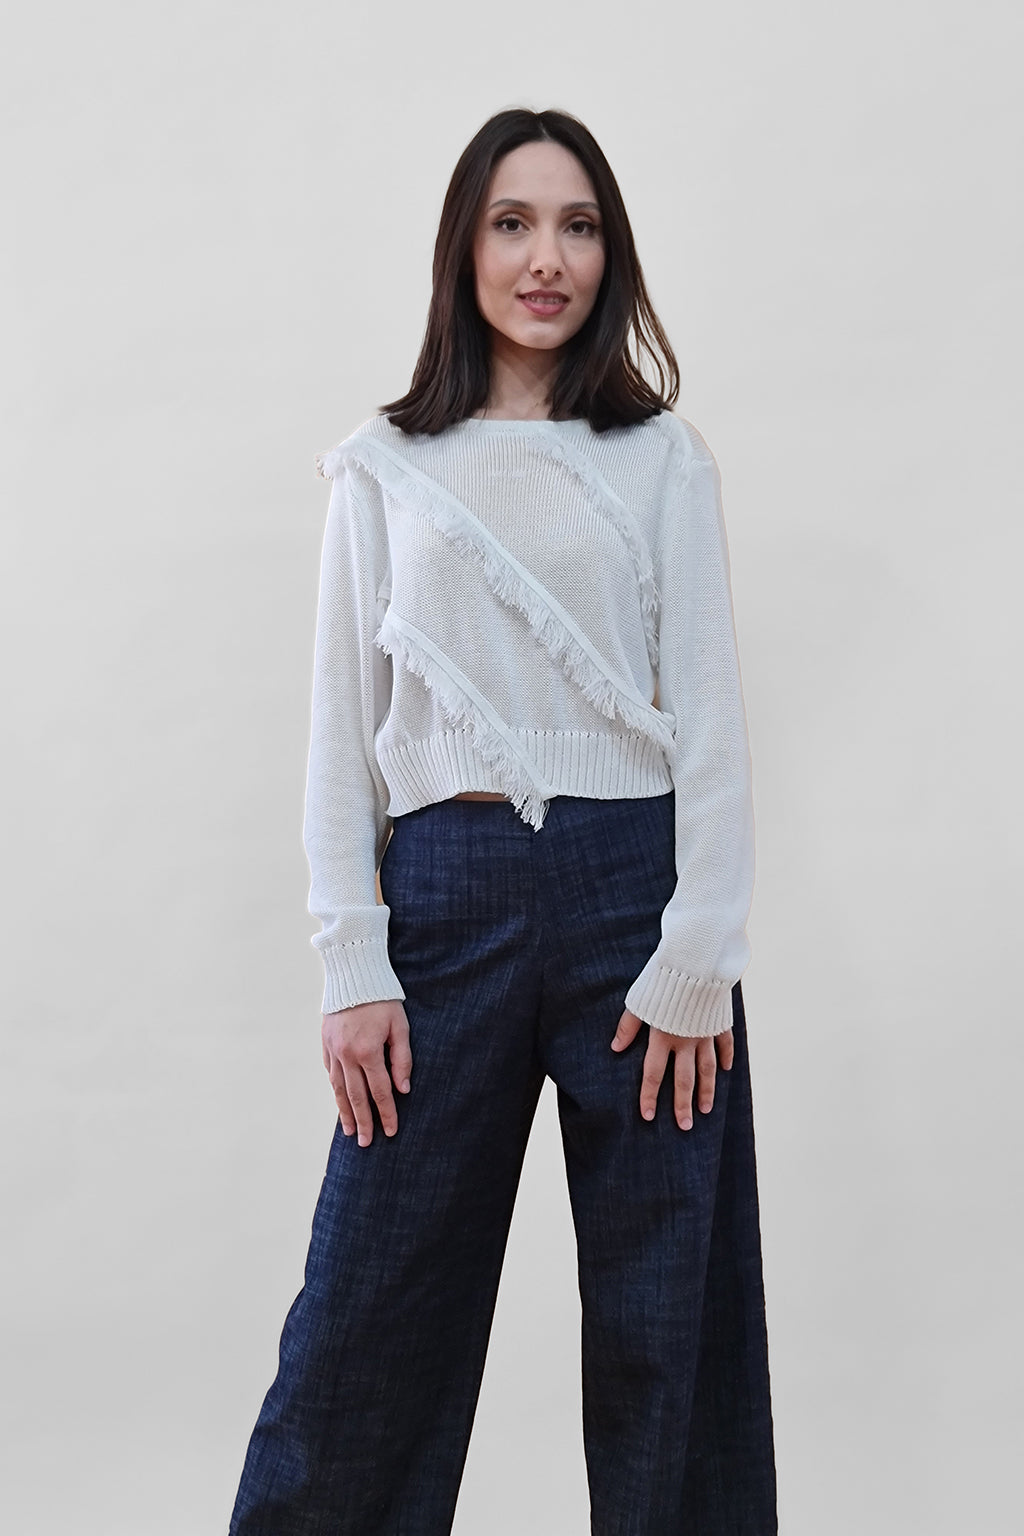 Woman in stylish white sweater and dark wide-leg pants against a plain background